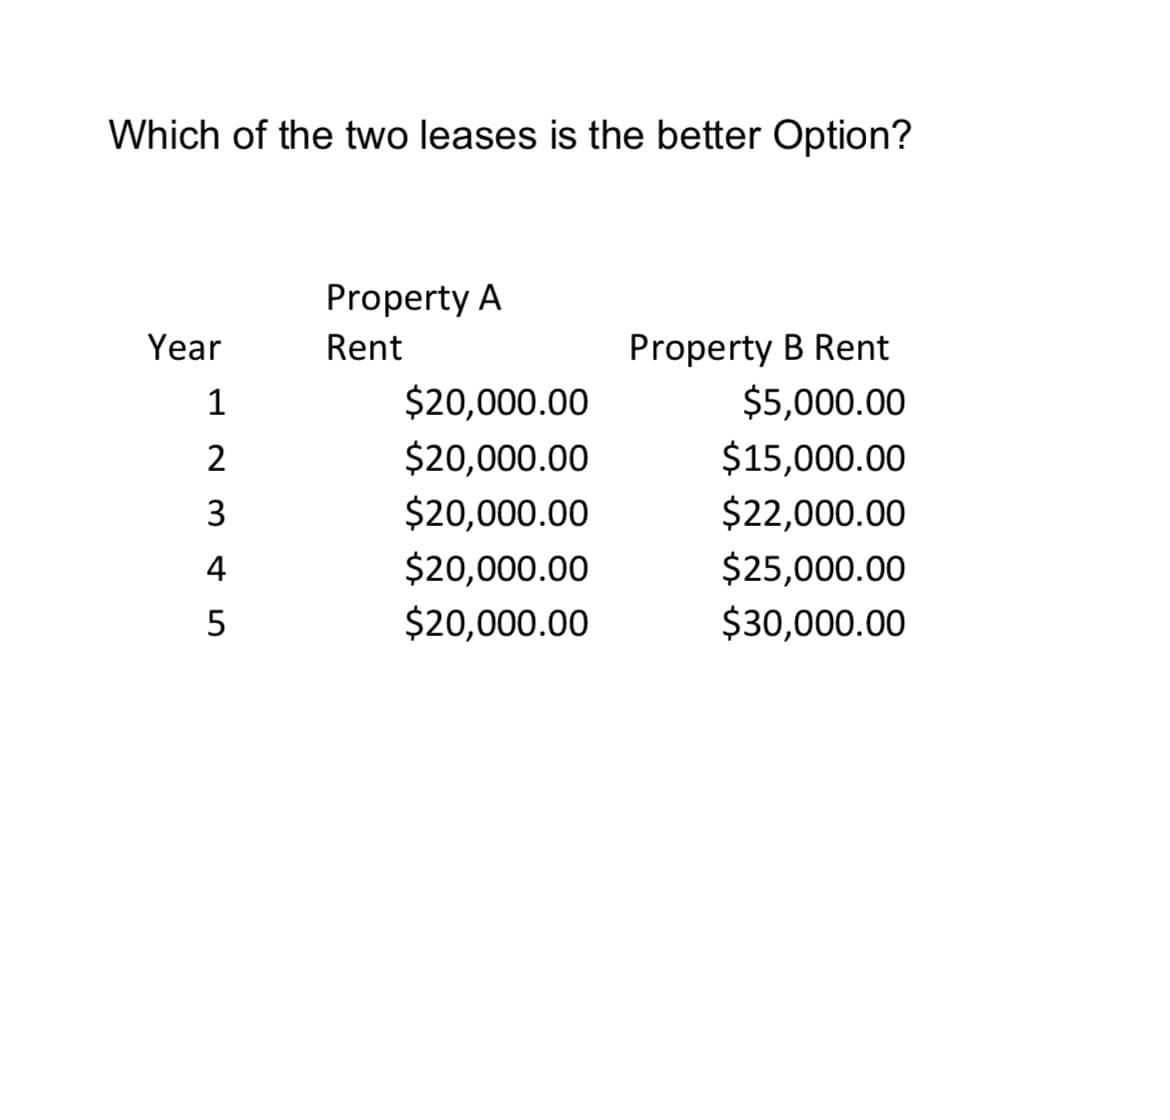 Which of the two leases is the better Option?
Year
1
2
3
4
5
Property A
Rent
$20,000.00
$20,000.00
$20,000.00
$20,000.00
$20,000.00
Property B Rent
$5,000.00
$15,000.00
$22,000.00
$25,000.00
$30,000.00